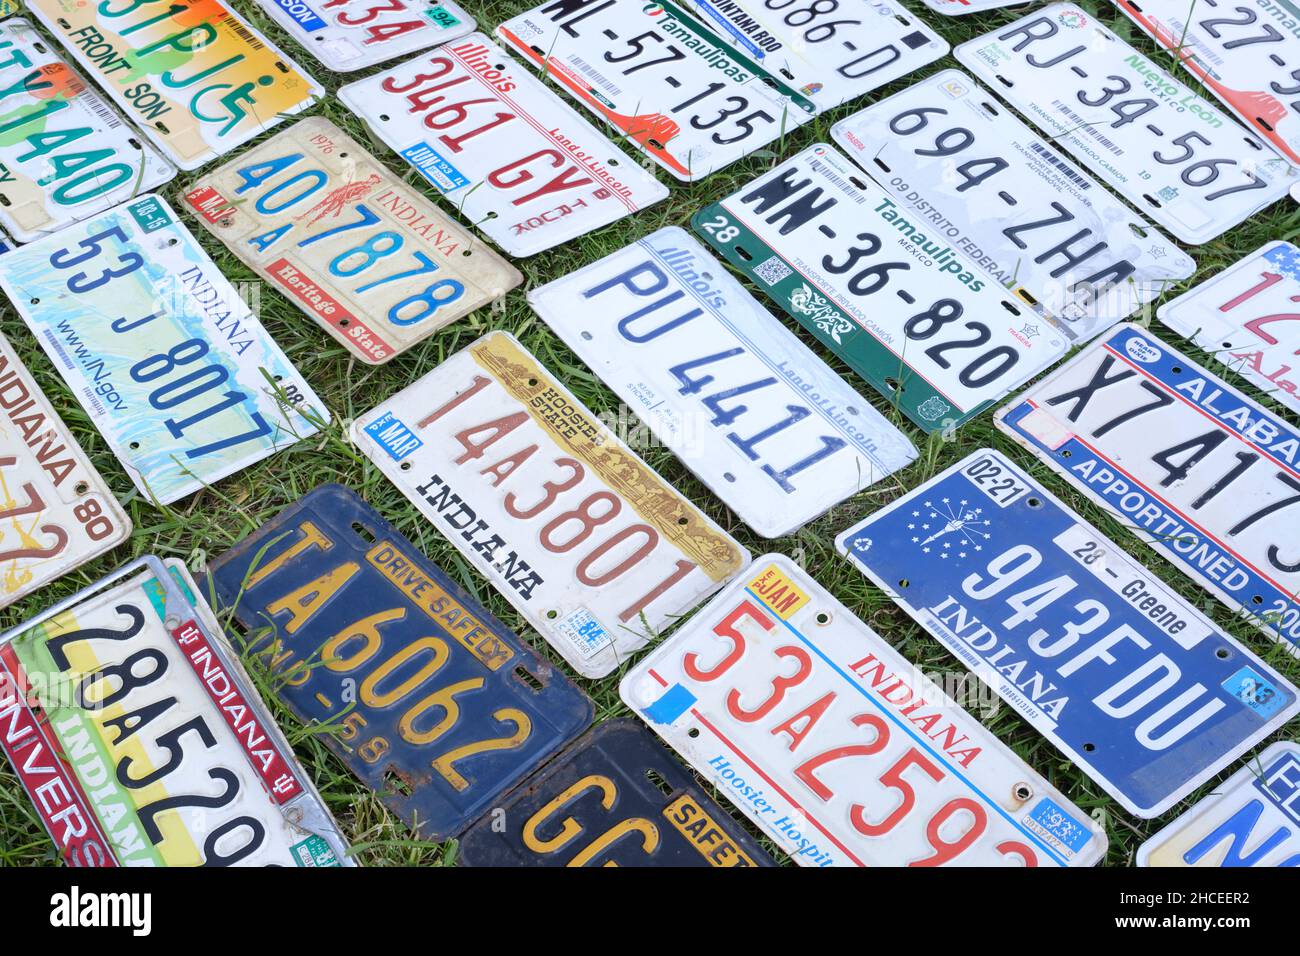 USA old vehicles license plates placed on the grass. Festival OLD CAR Land. May 12, 2019. KIev, Ukraine Stock Photo